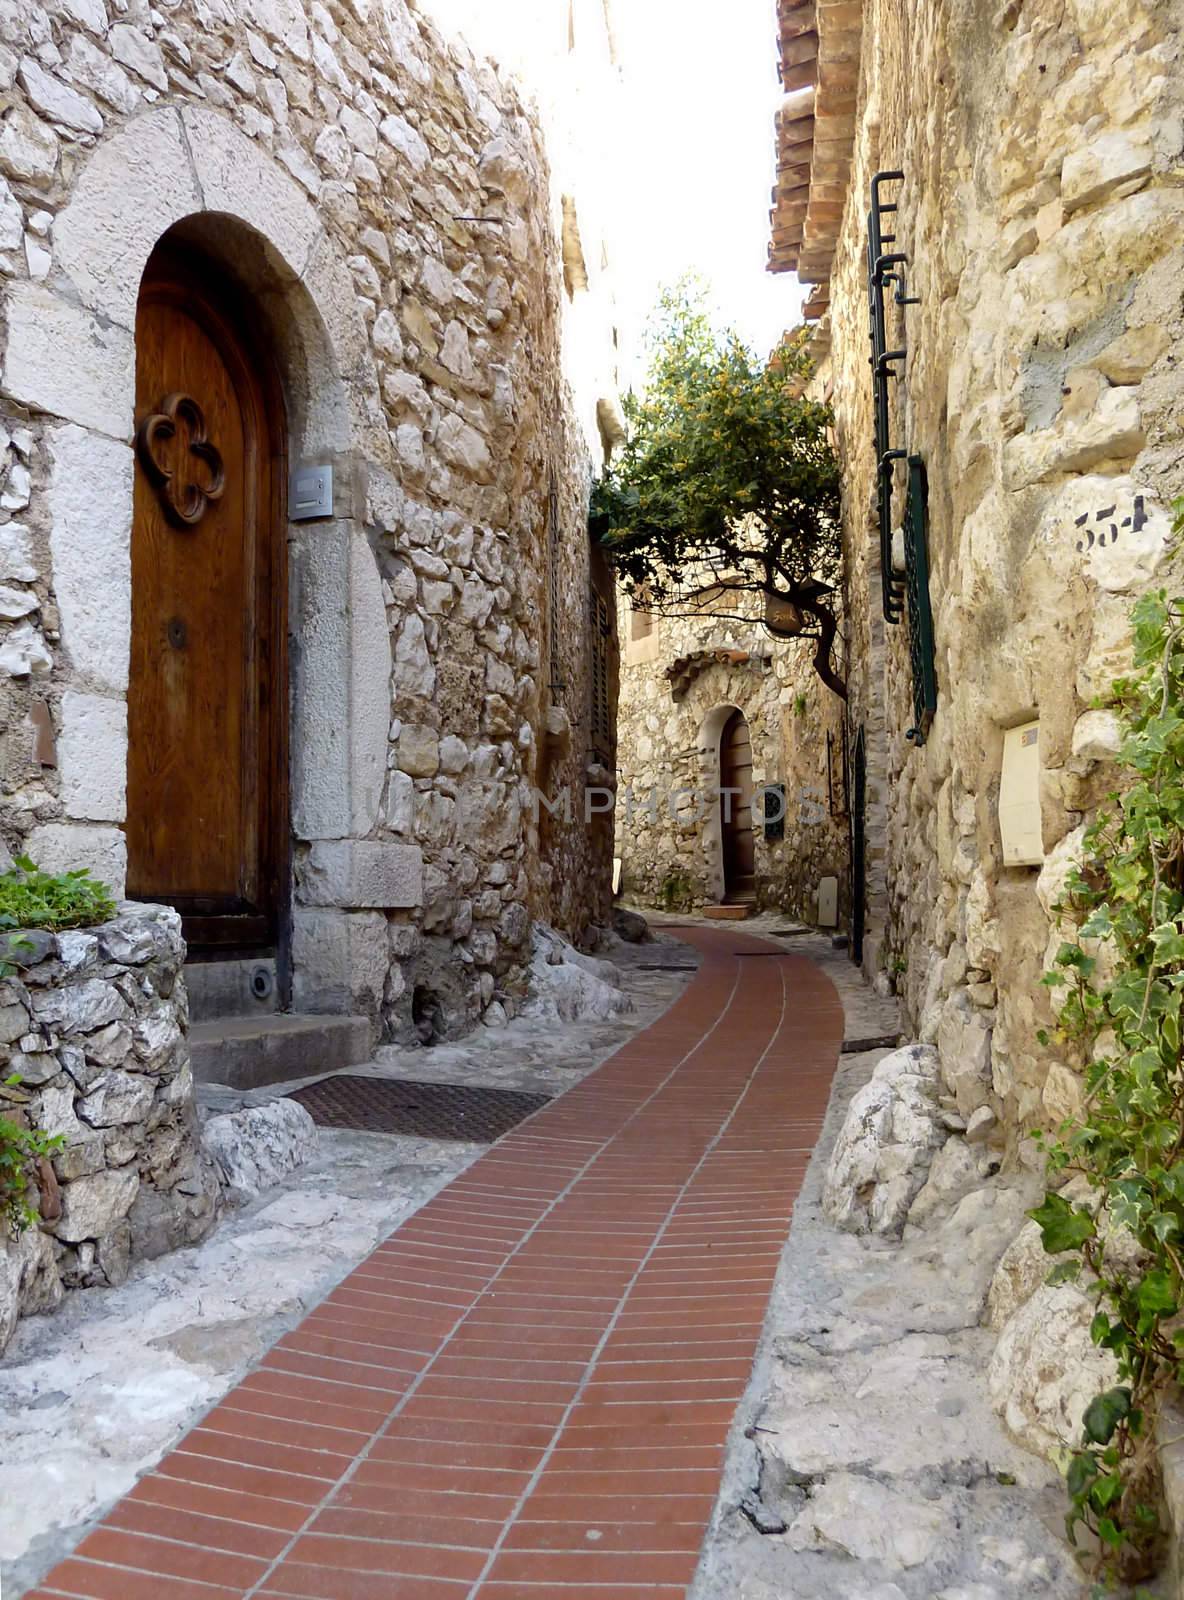 Street of old Eze village, south of France, and old brown door made of wood